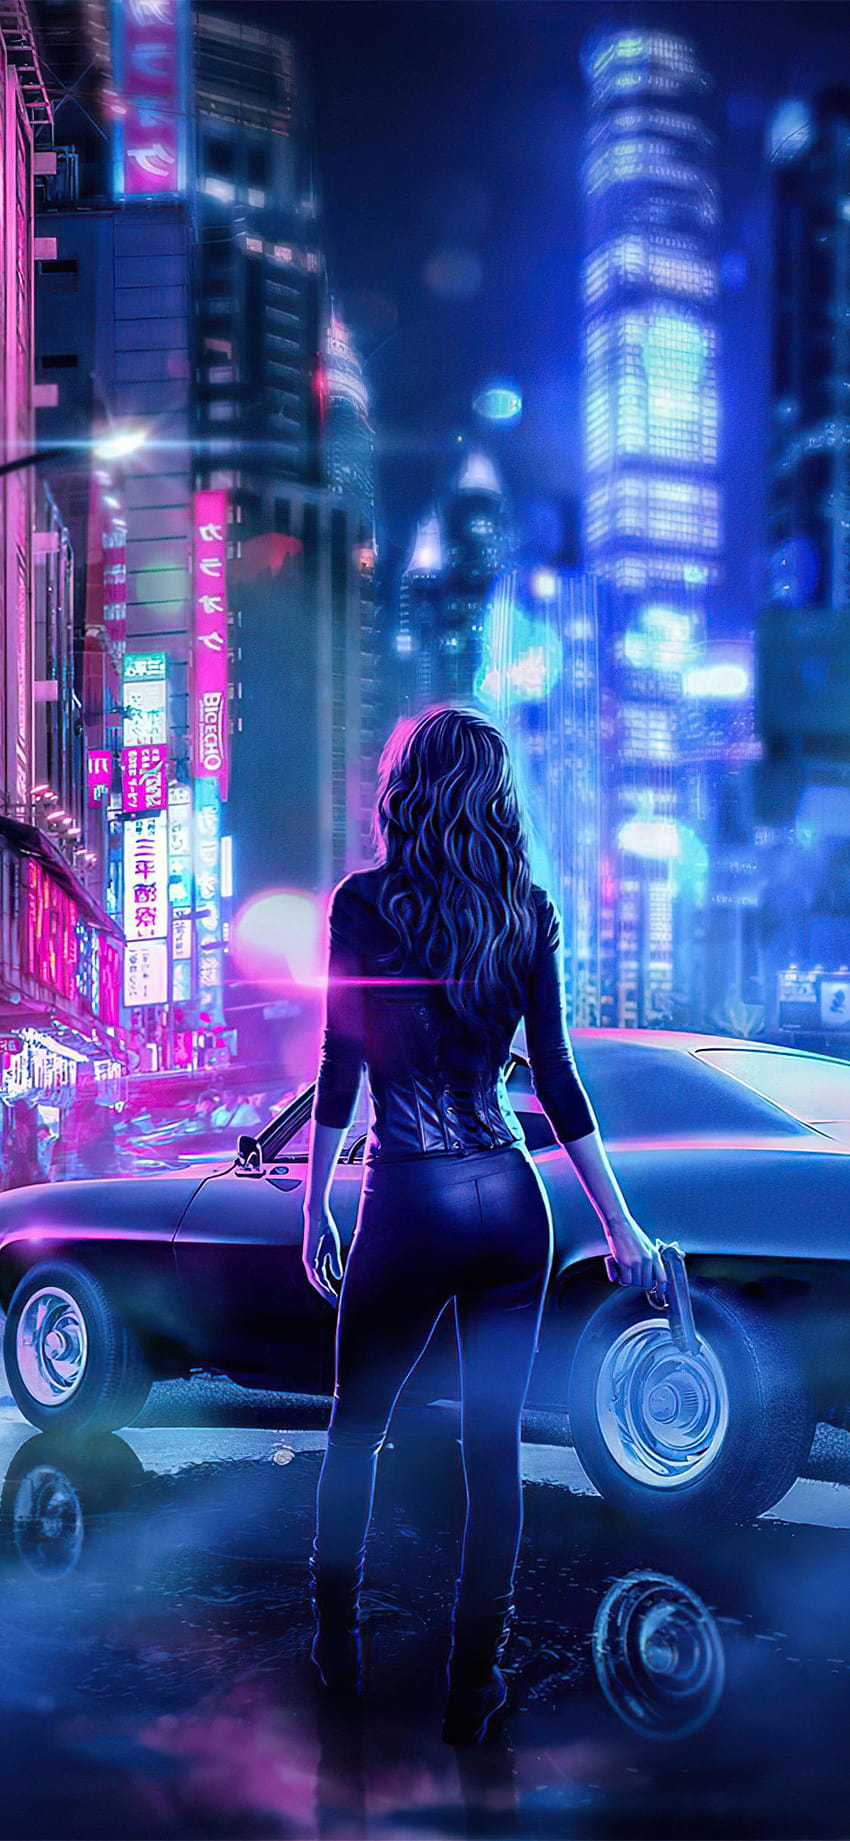 1125x2436 Cyber​​ Japan Neon Lights Girl With Gun Iphone XS,Iphone 10, Iphone X , Backgrounds, and, iphone サイバー HD電話の壁紙